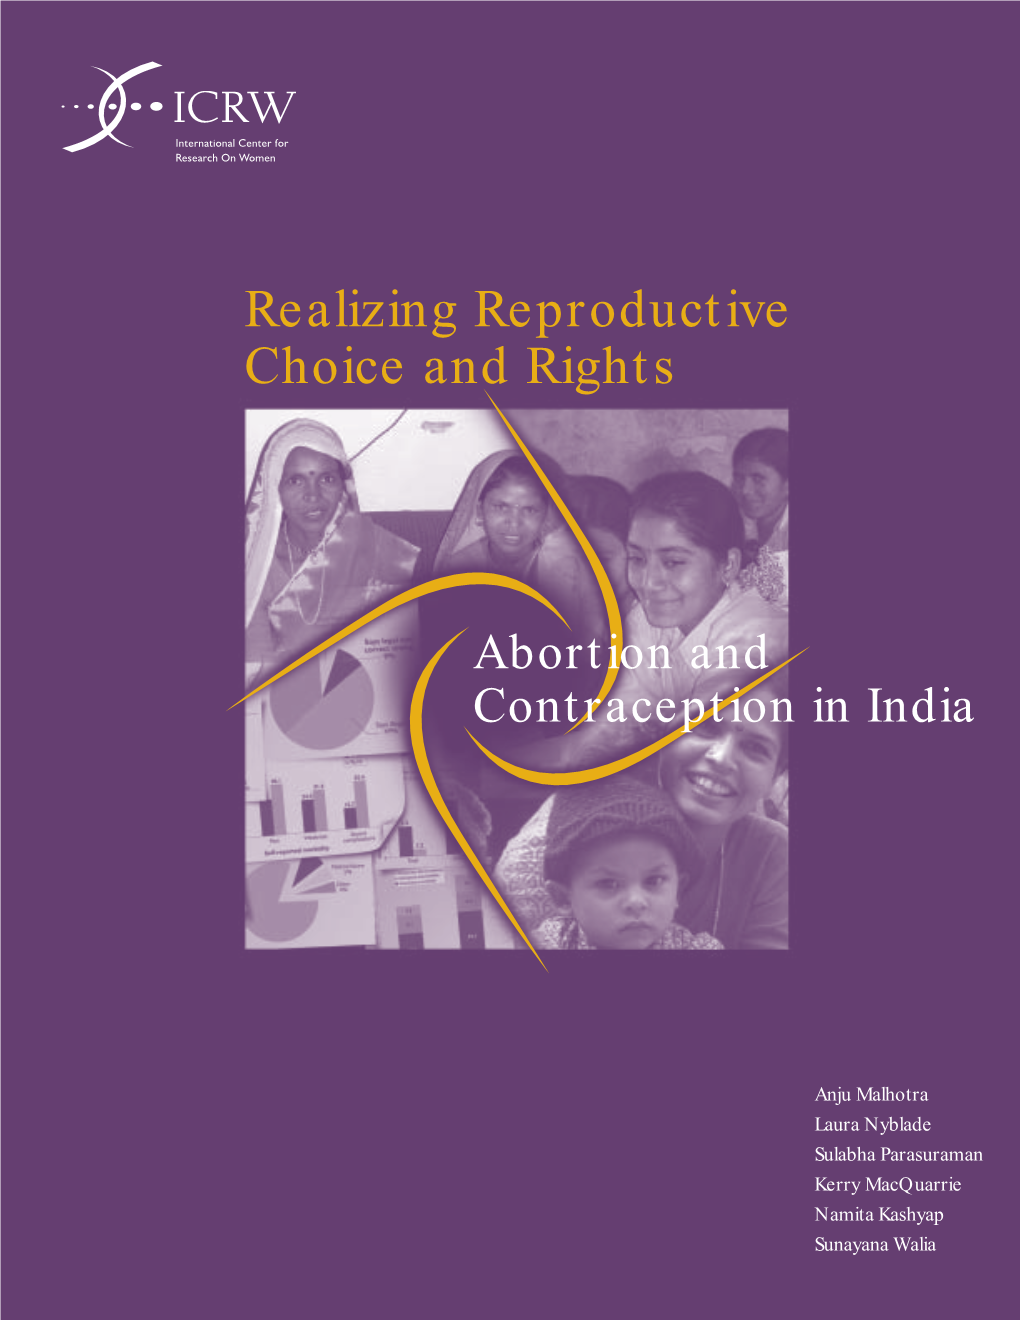 Realizing Reproductive Rights and Choice: Abortion and Contraception